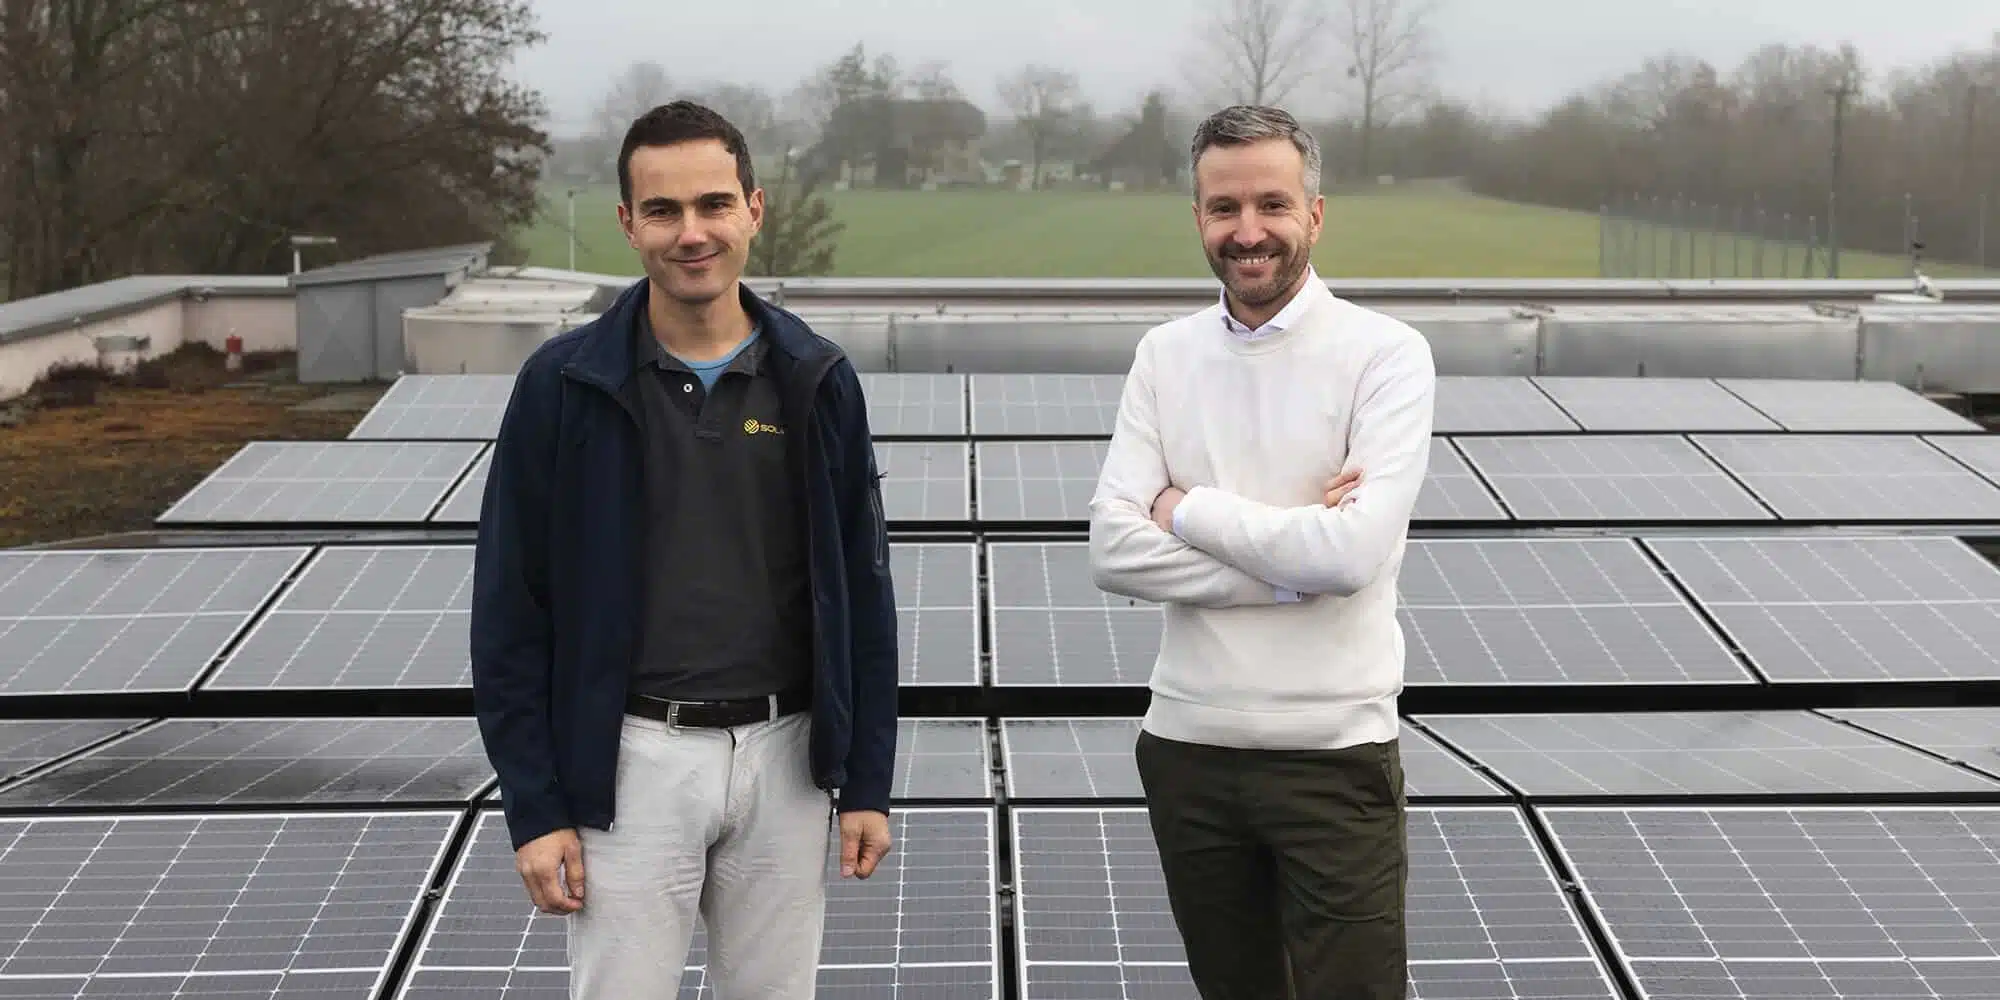 Clyde invests in solar projects from Solarify, enabling free charging with more and more solar power.